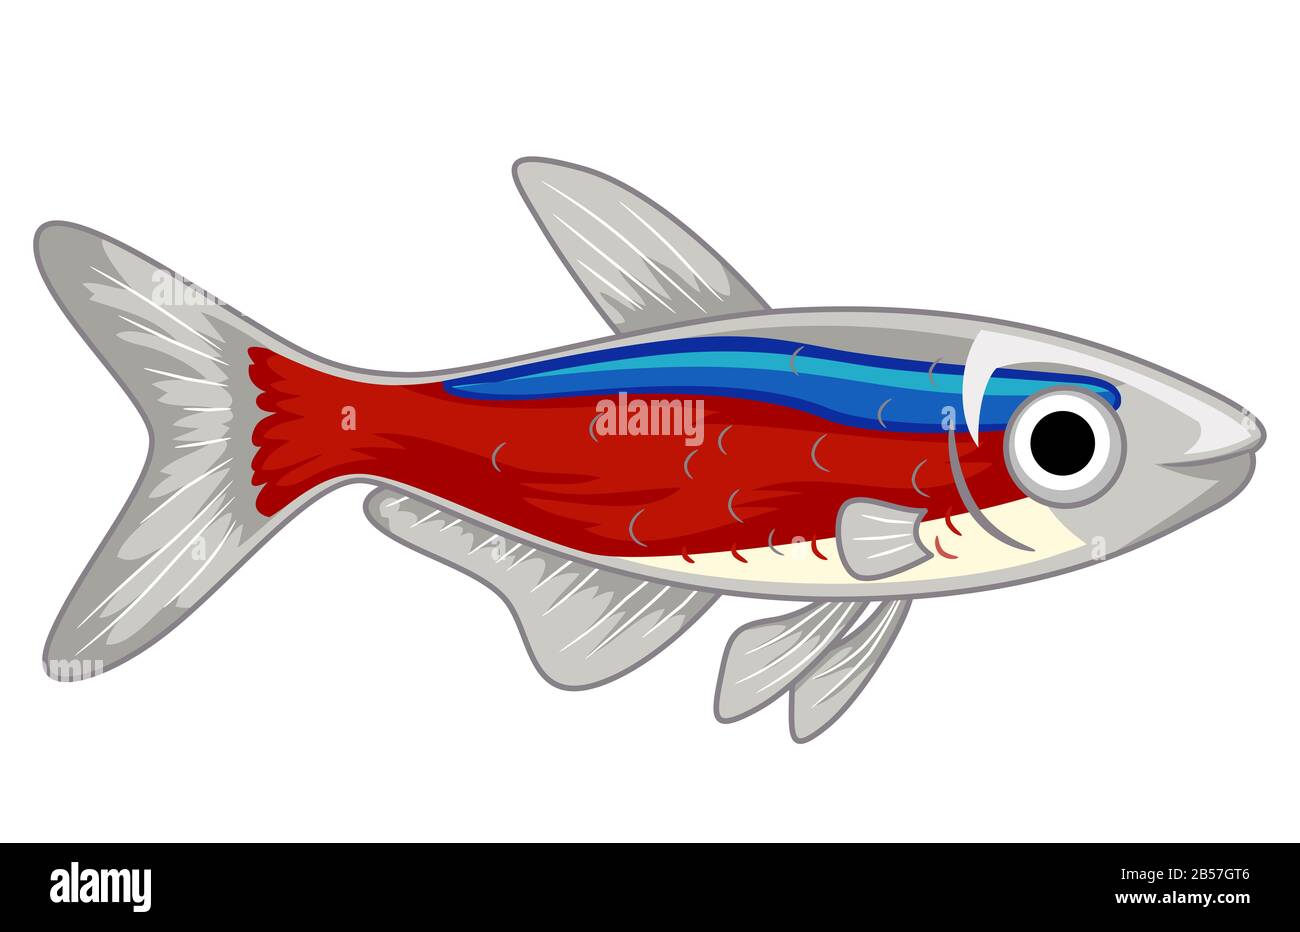 Illustration of a Cute Cardinal Neon Tetra Pet Fish with Big Eye and Red Blue Color Stock Photo